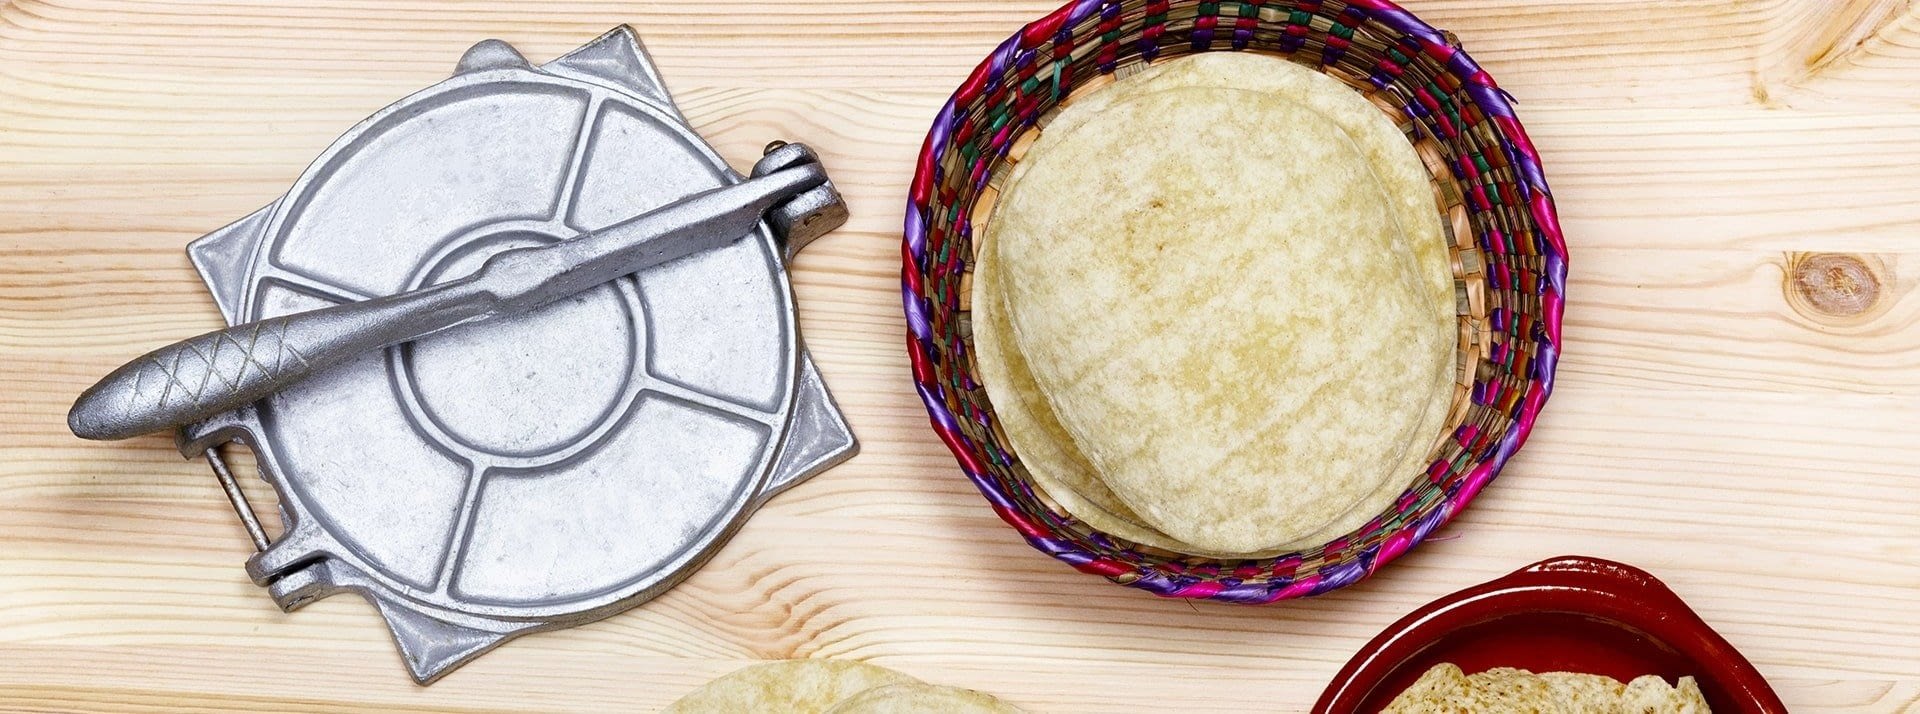 How to use tortilla press